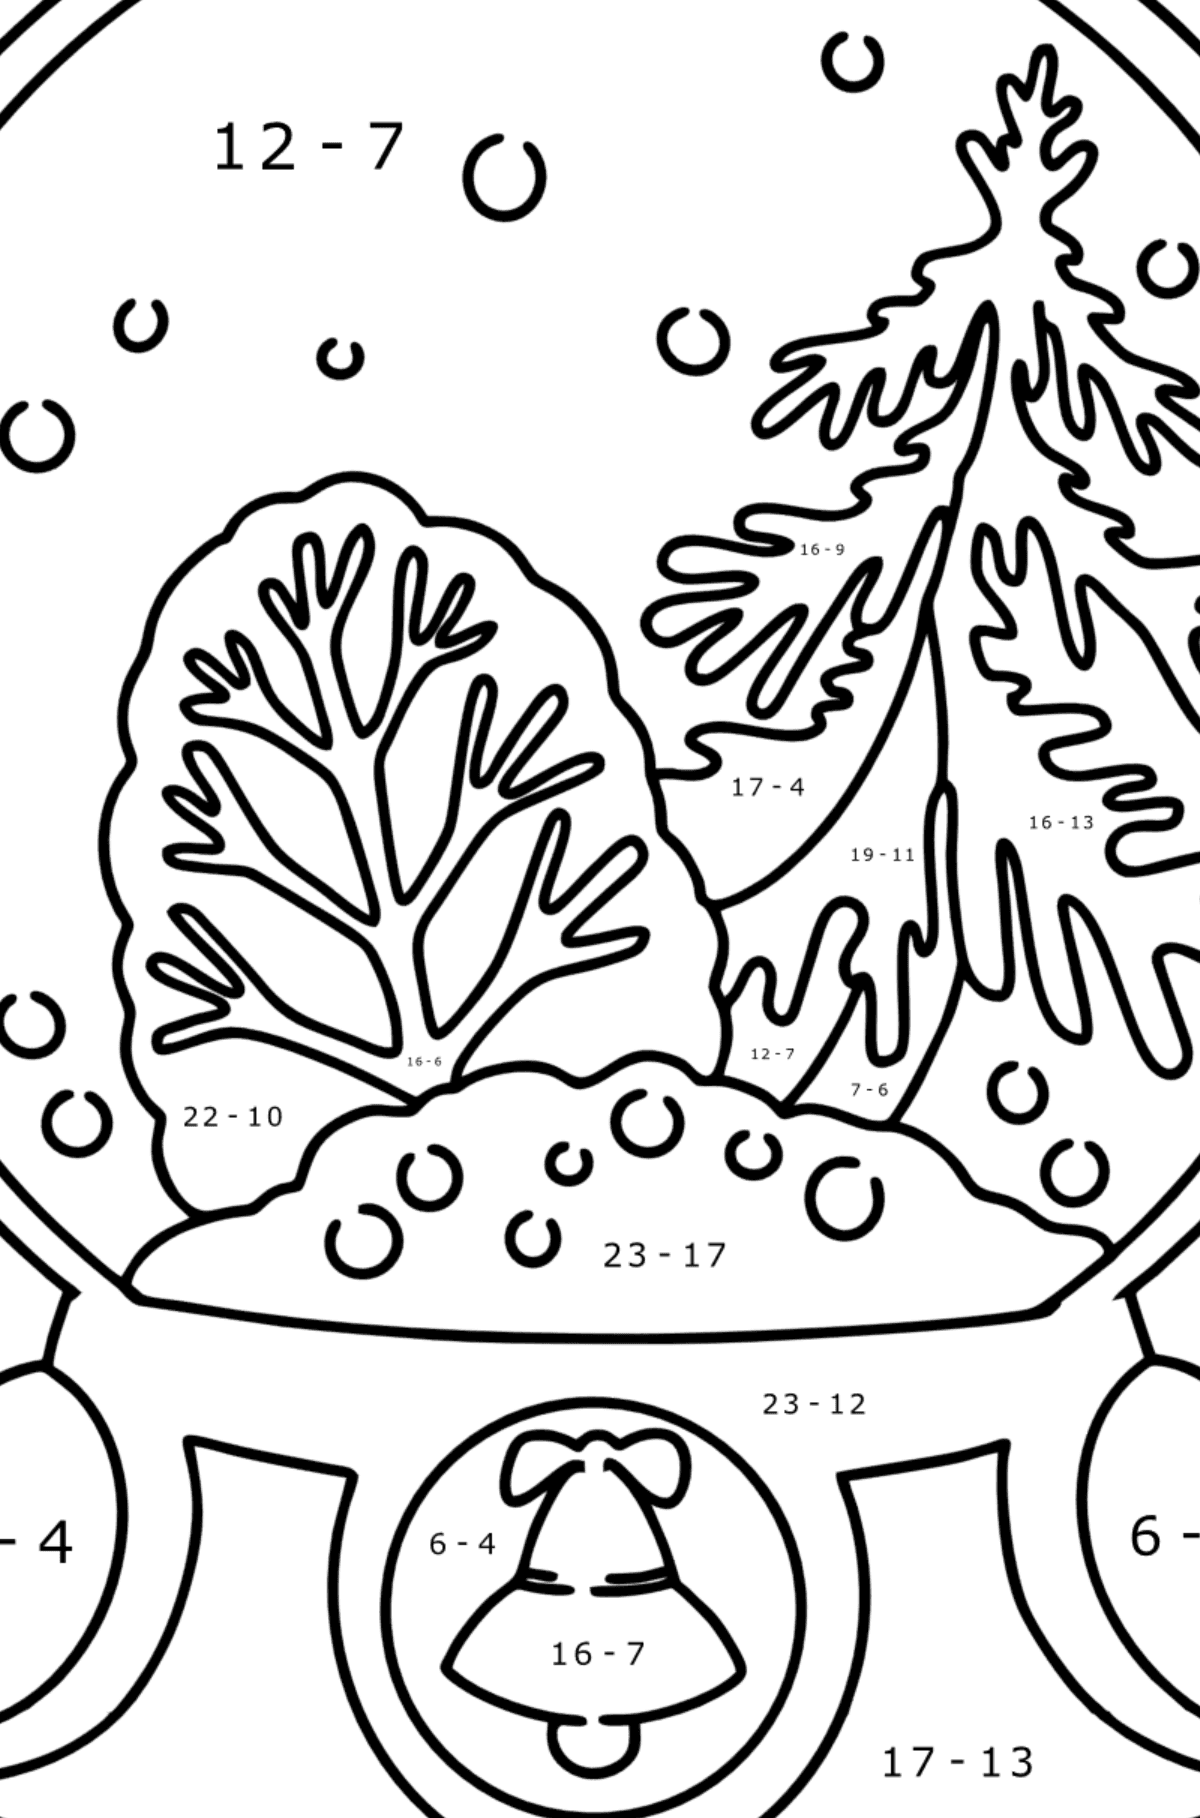 Snow Globe coloring page - Math Coloring - Subtraction for Kids